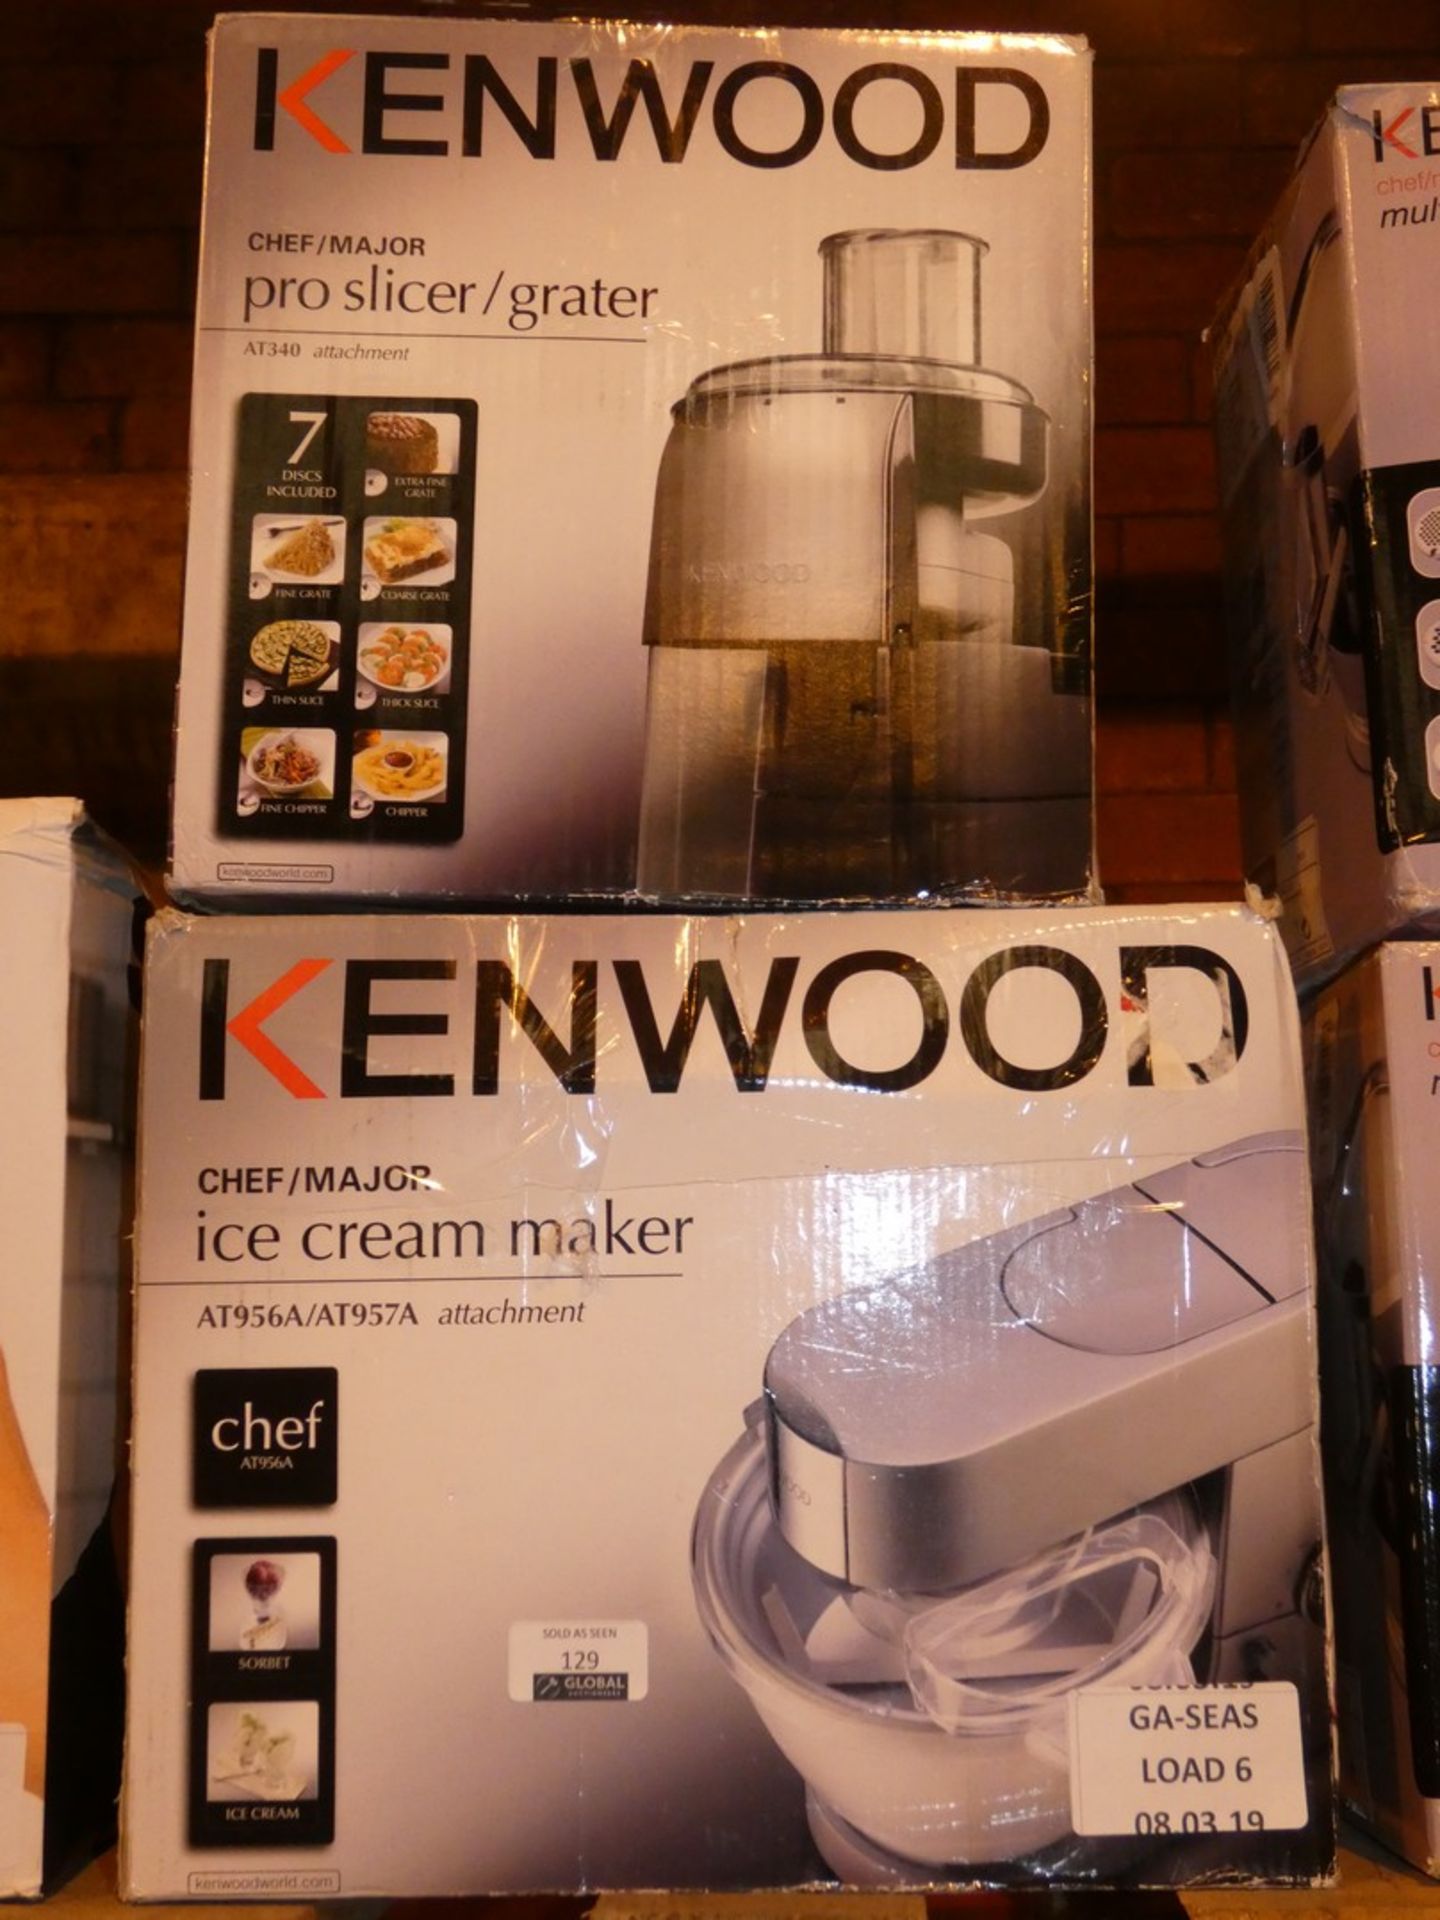 Lot to Contain 2 Assorted Items To Include a Kenwood Ice Cream Maker and a Pro Slice Attachment - Image 2 of 3